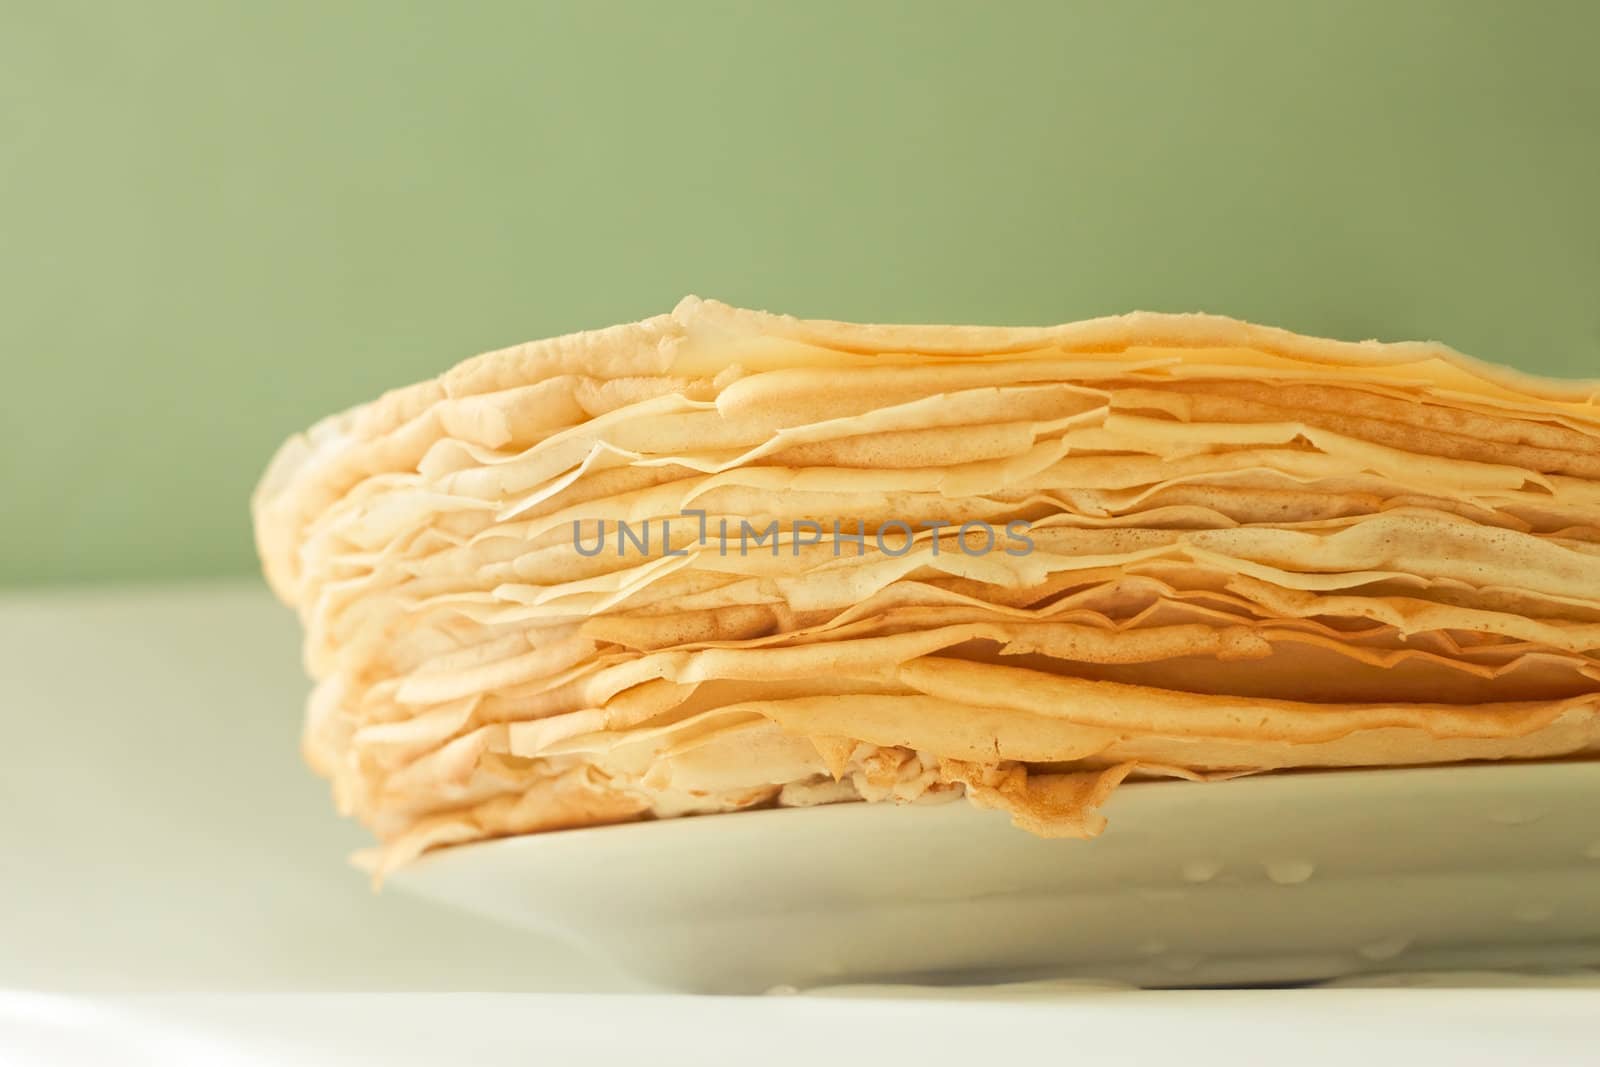 Stack of large pancakes on a plate close up